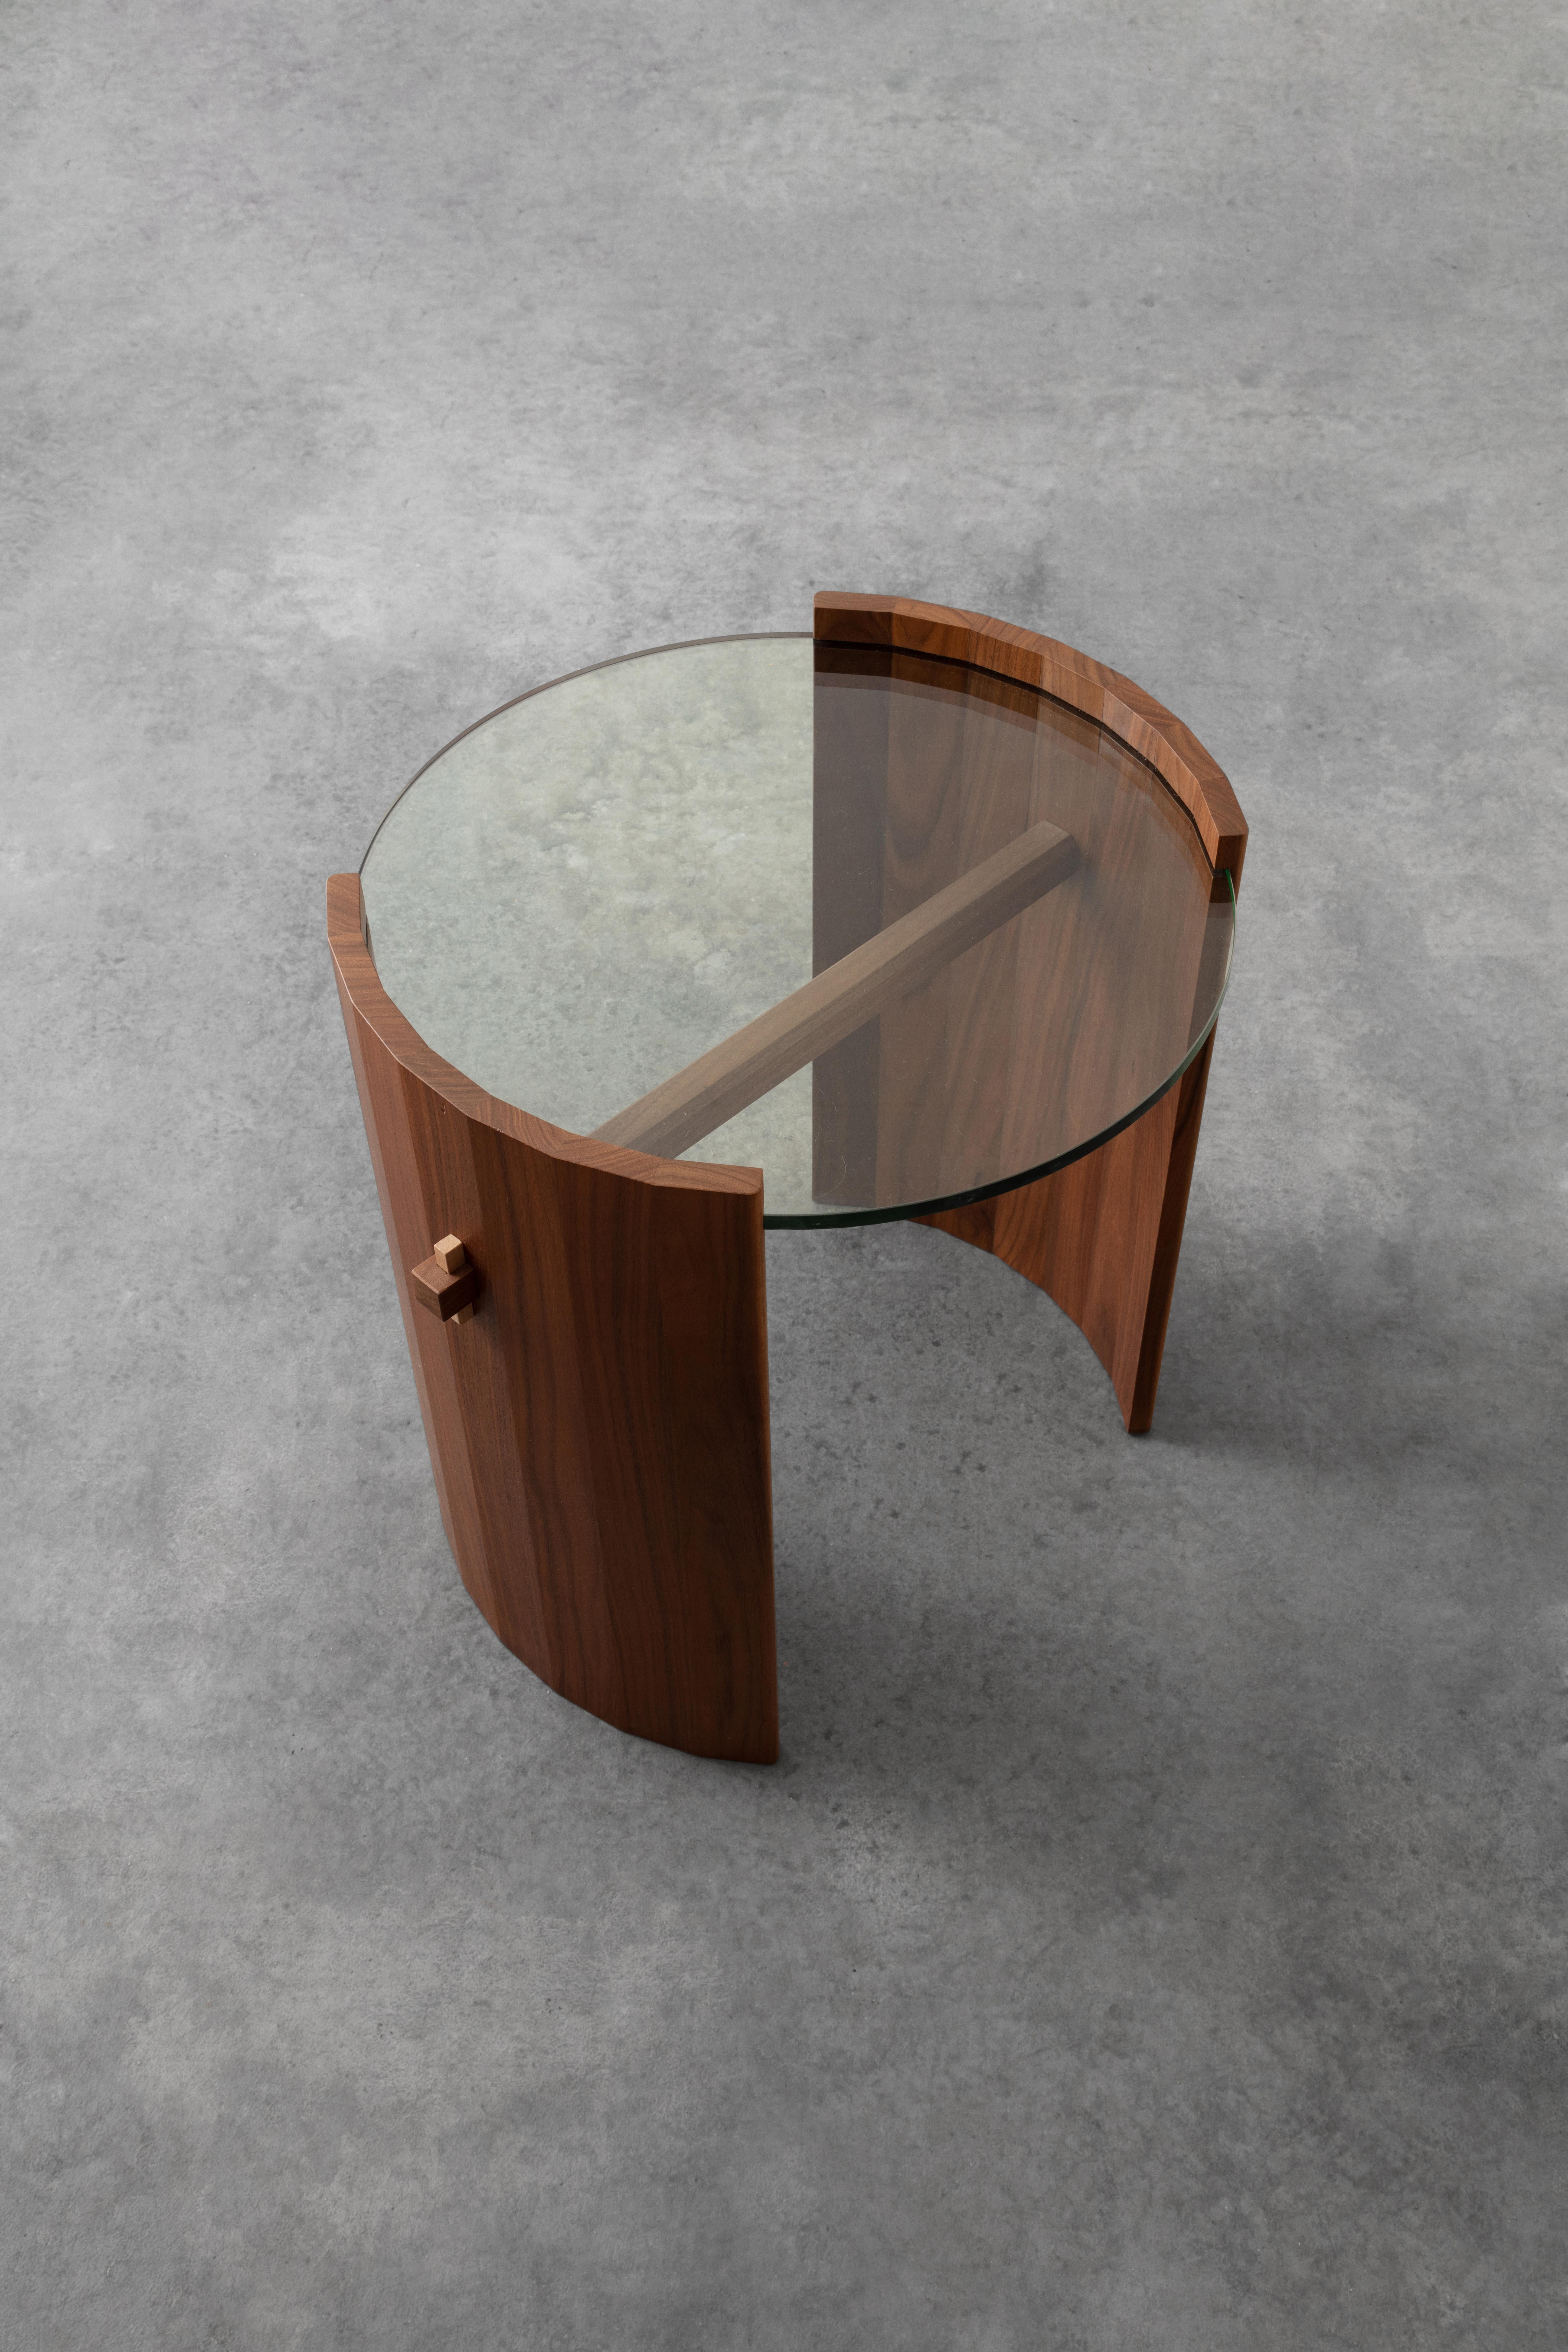 The Coopered Side Table is an elegant solid wood
piece that celebrates woodworking and some of
its most traditional joinery techniques. As the name
suggests, the sides are coopered like a barrel to allow
each facet to follow the curvature of the